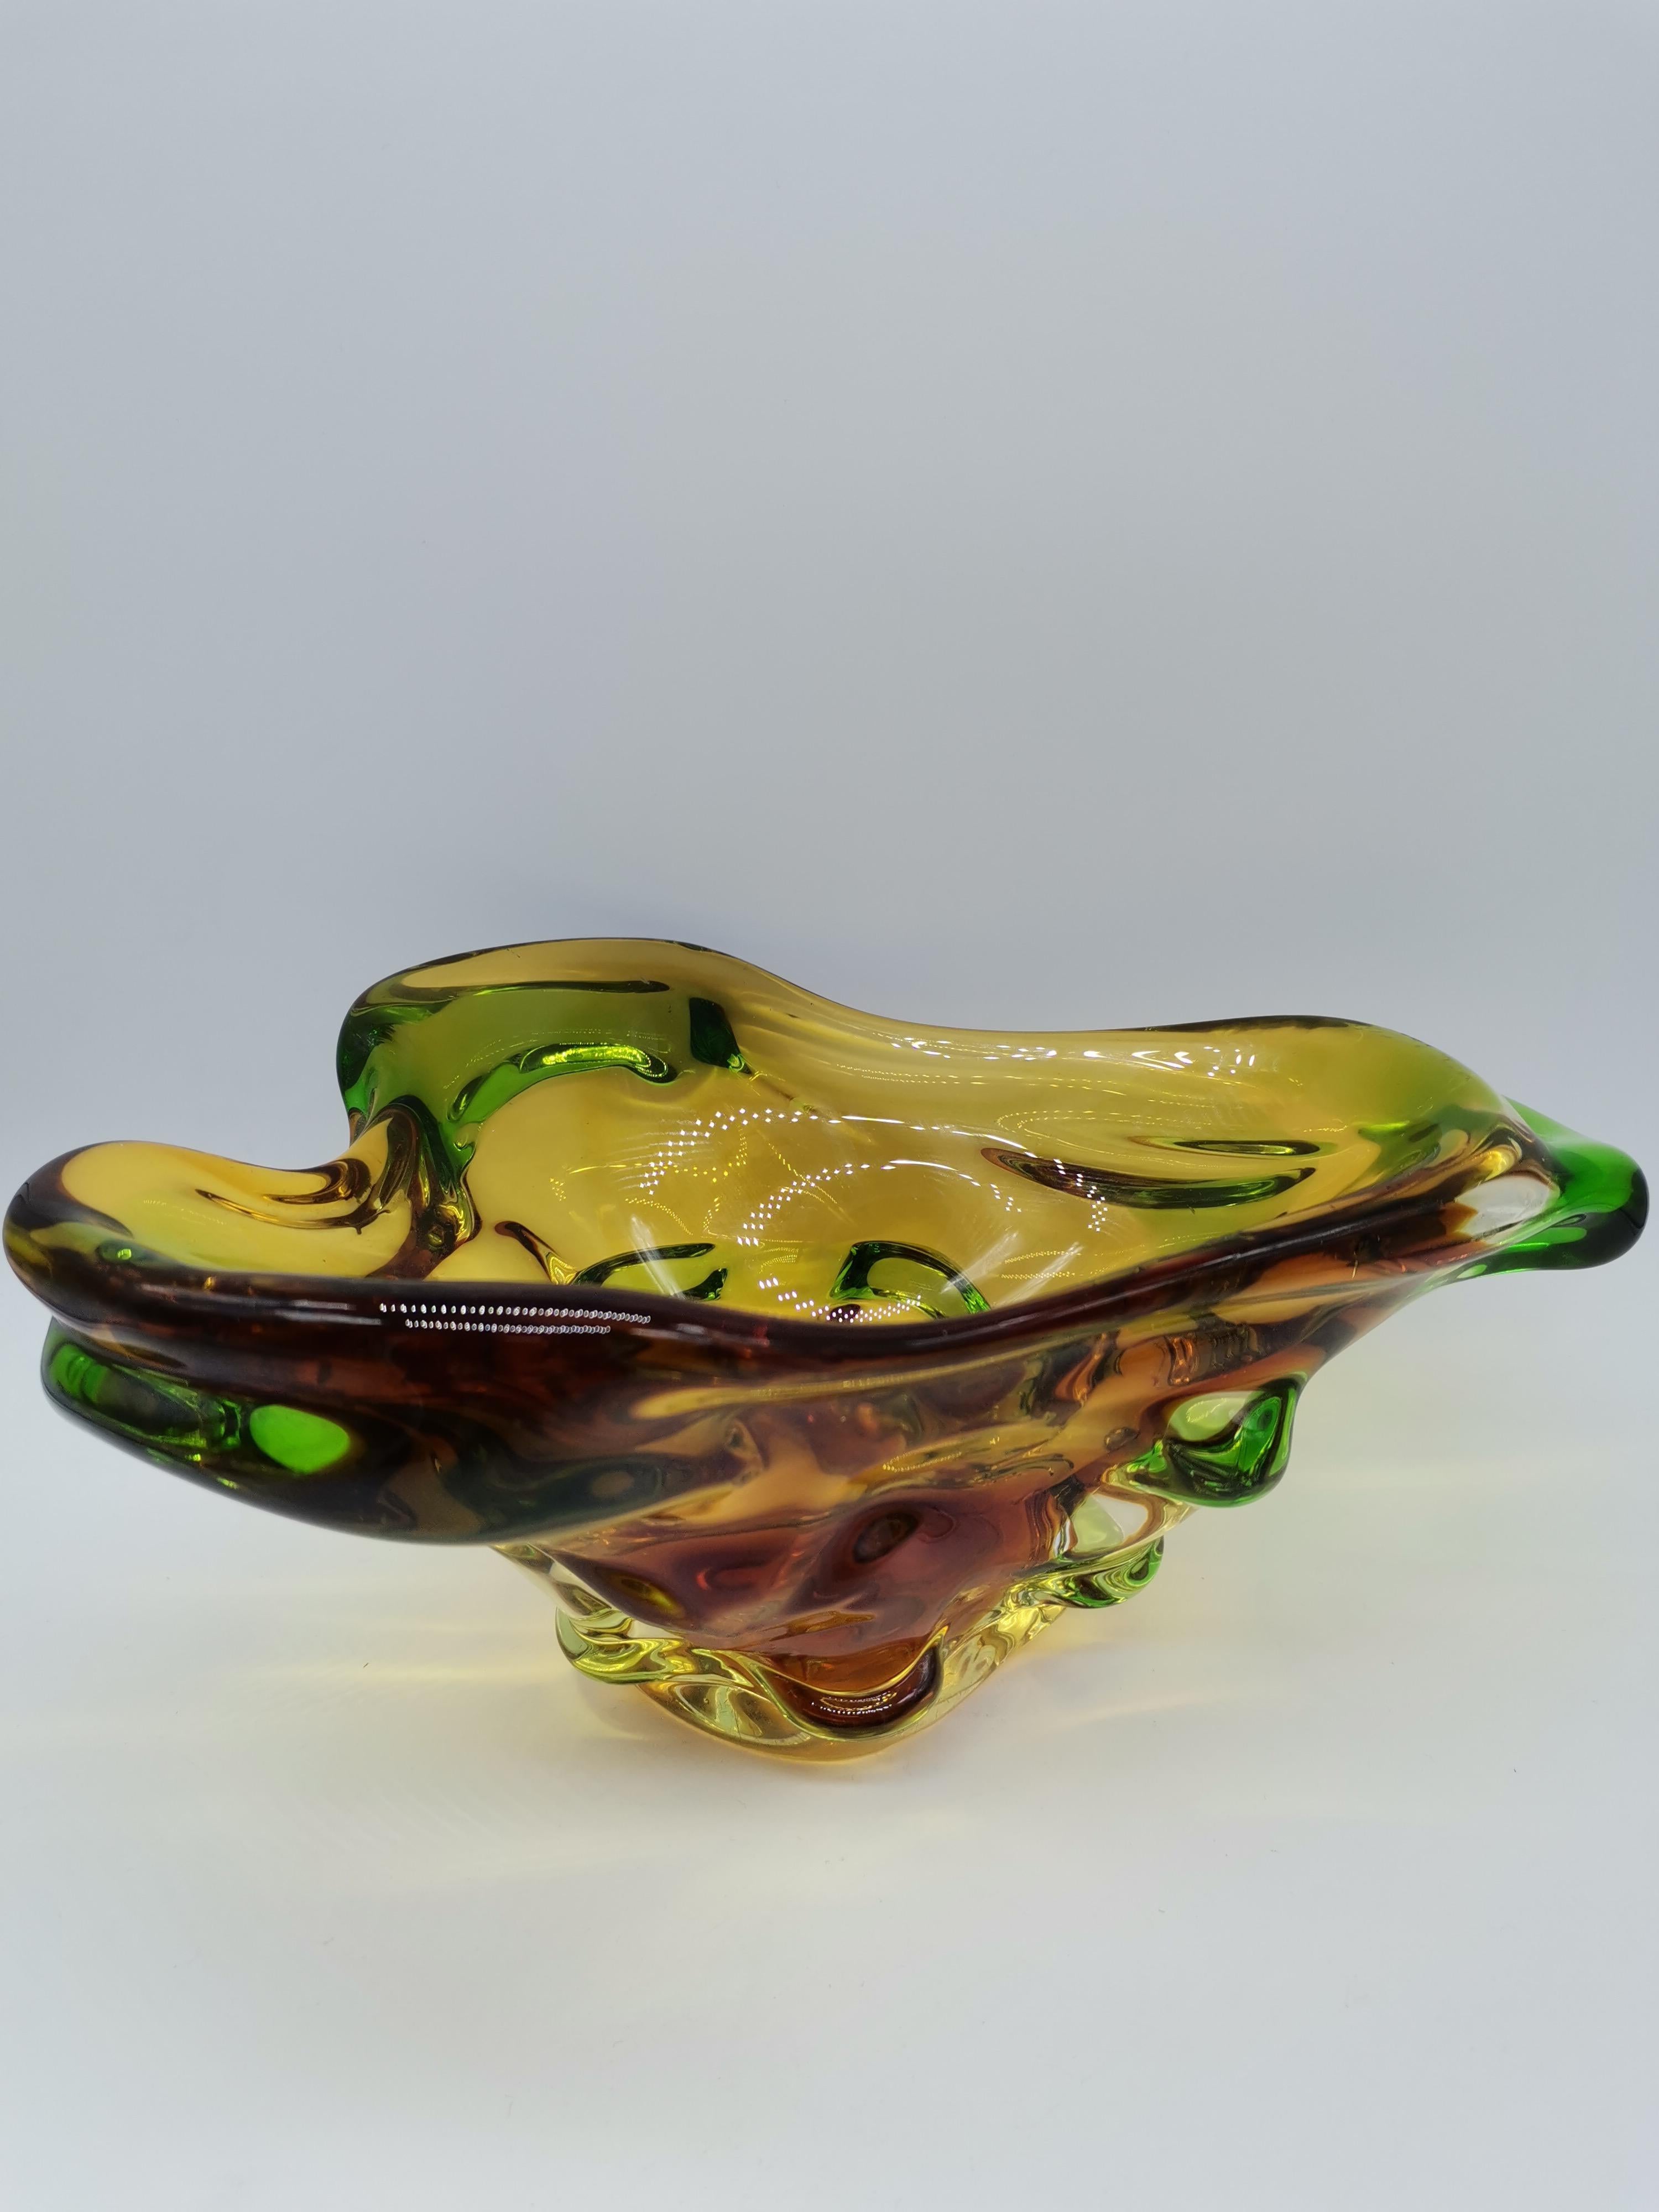 A coloured bowl made of murano glass can also be used as an ashtray.